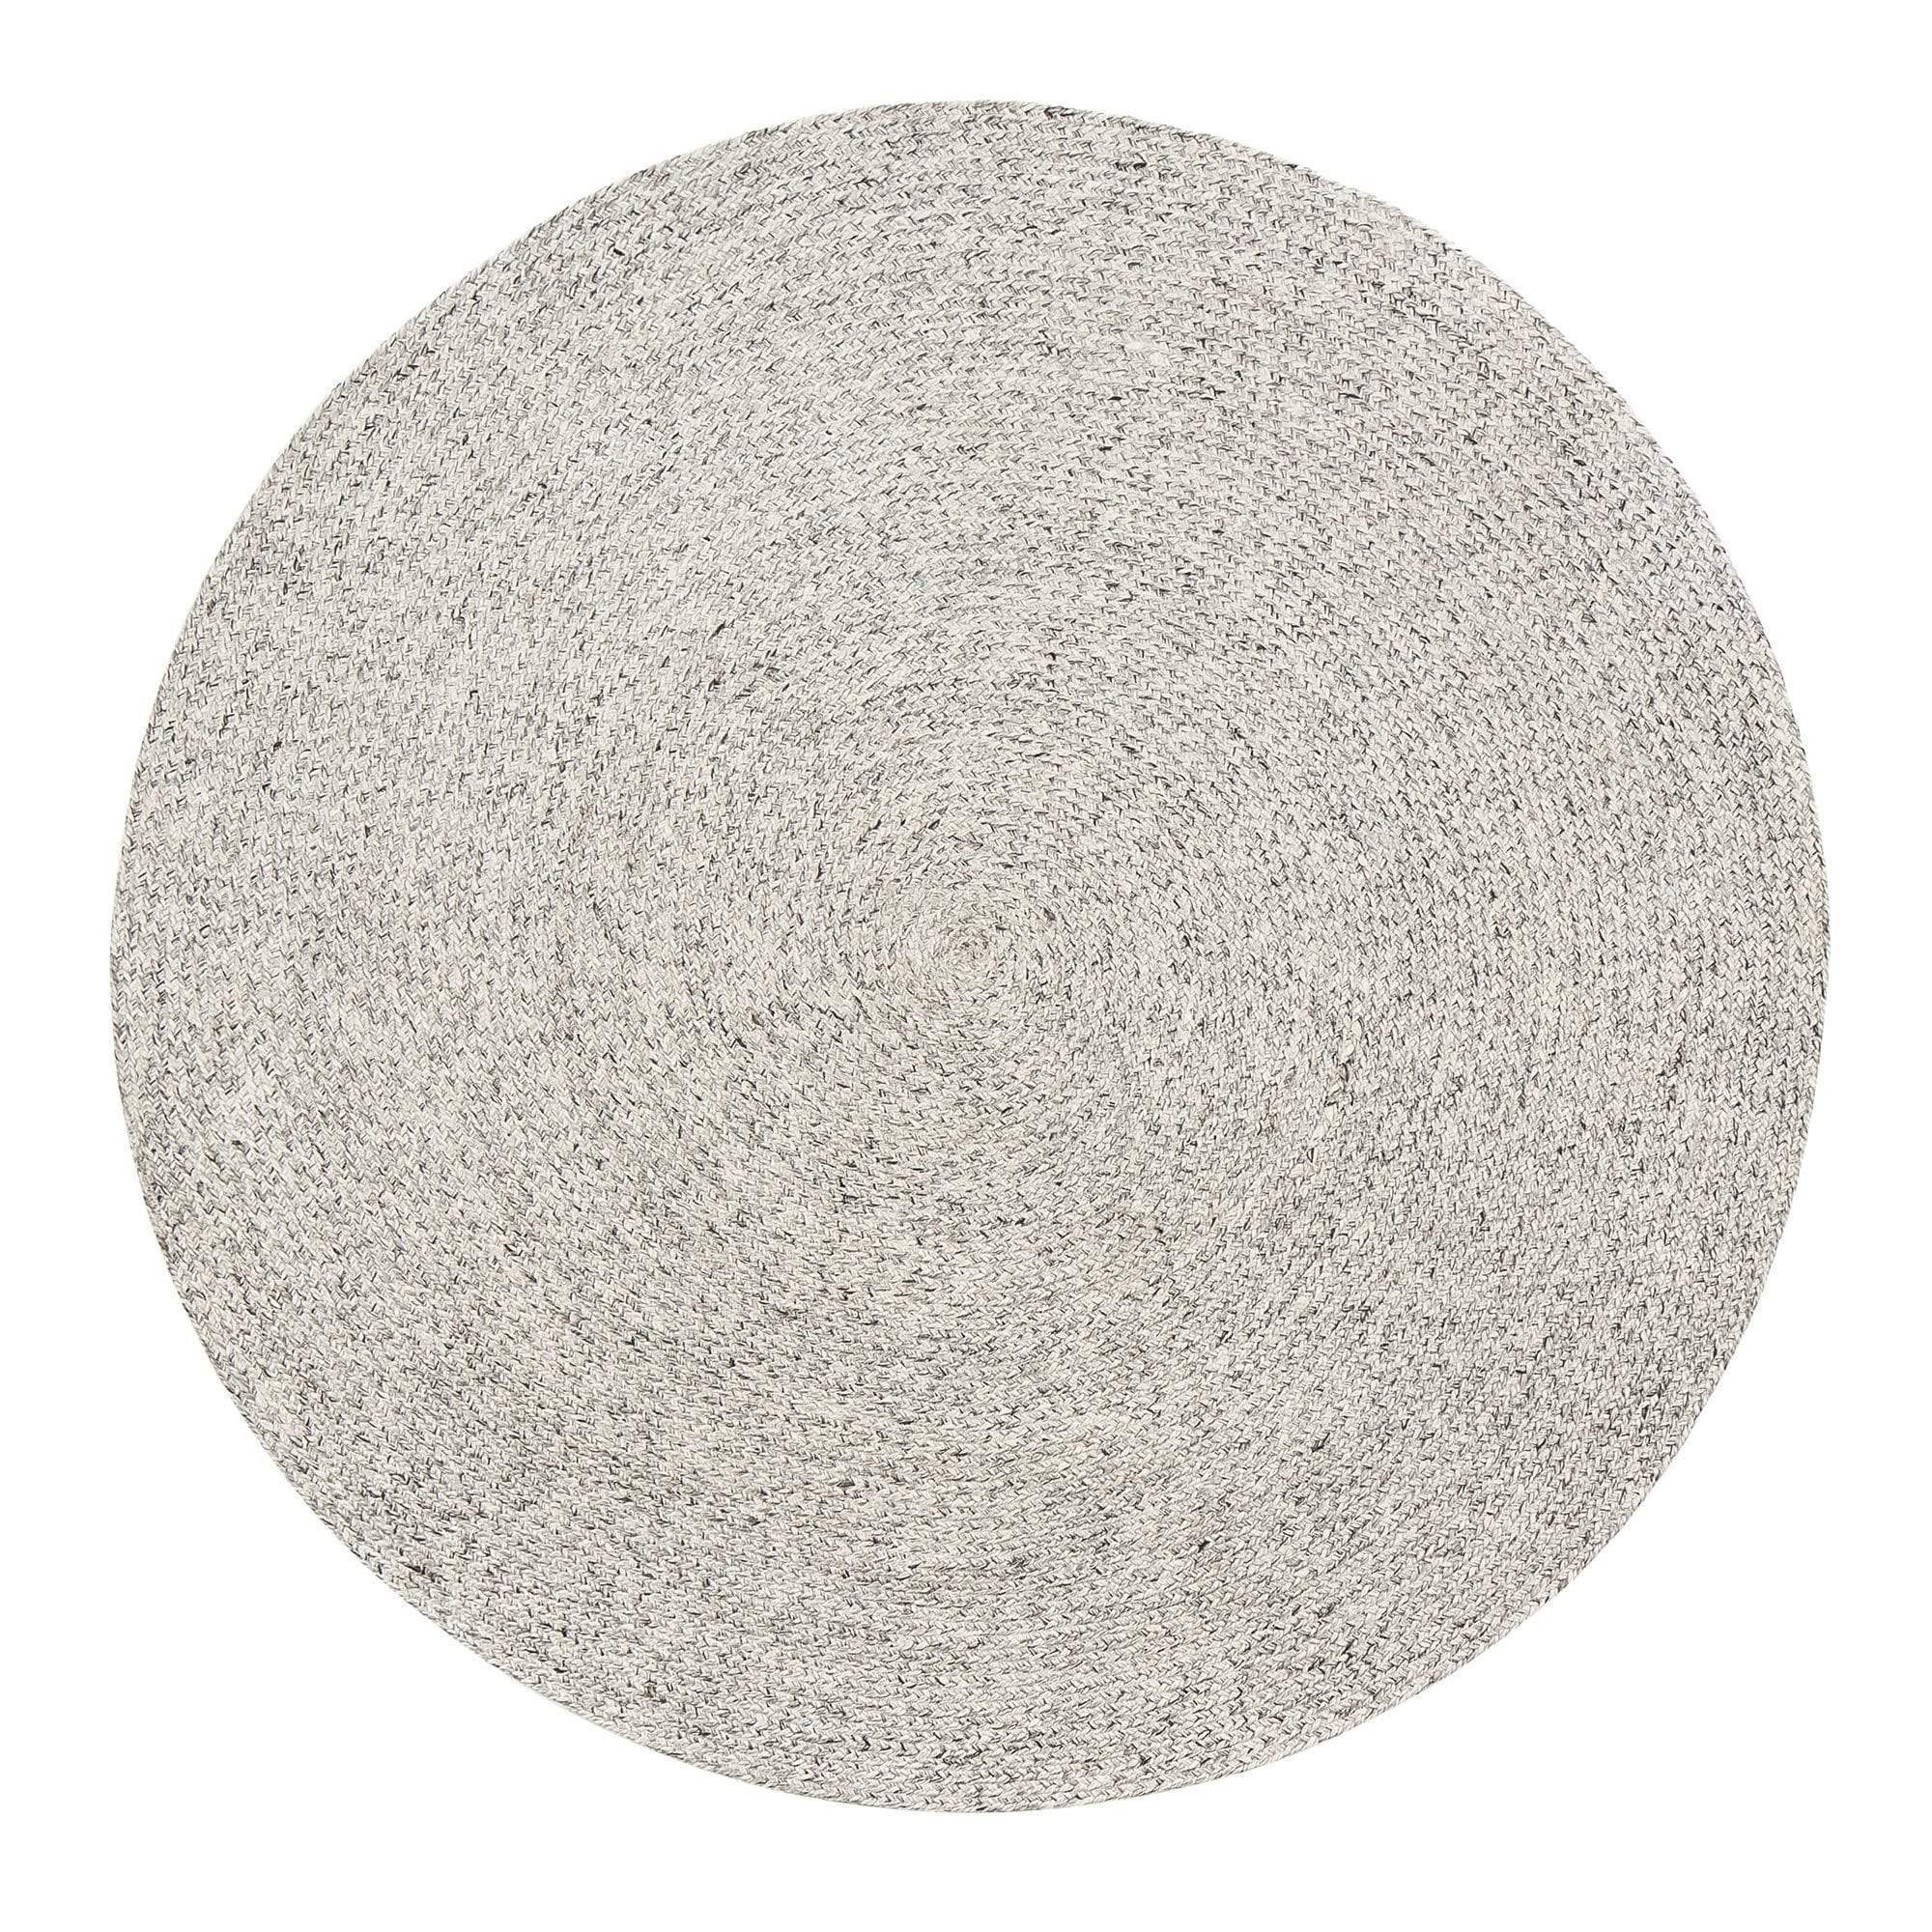 12 Month Rental Plan | Cosmos Round Rug | From $35/mo